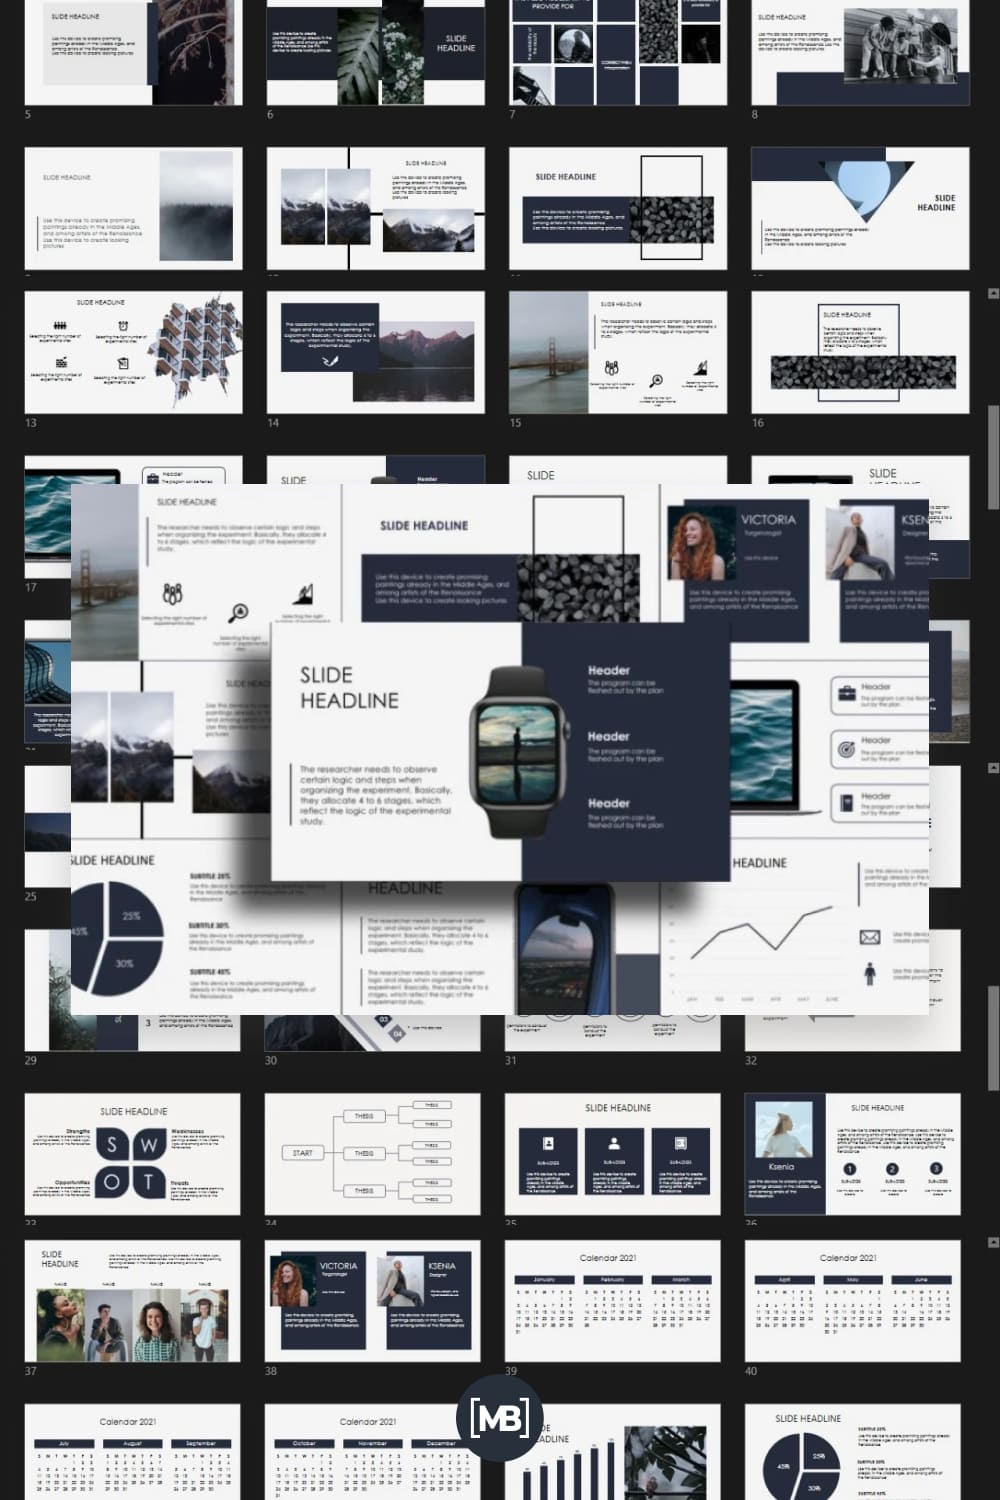 Business presentation powerpoint template with animation.